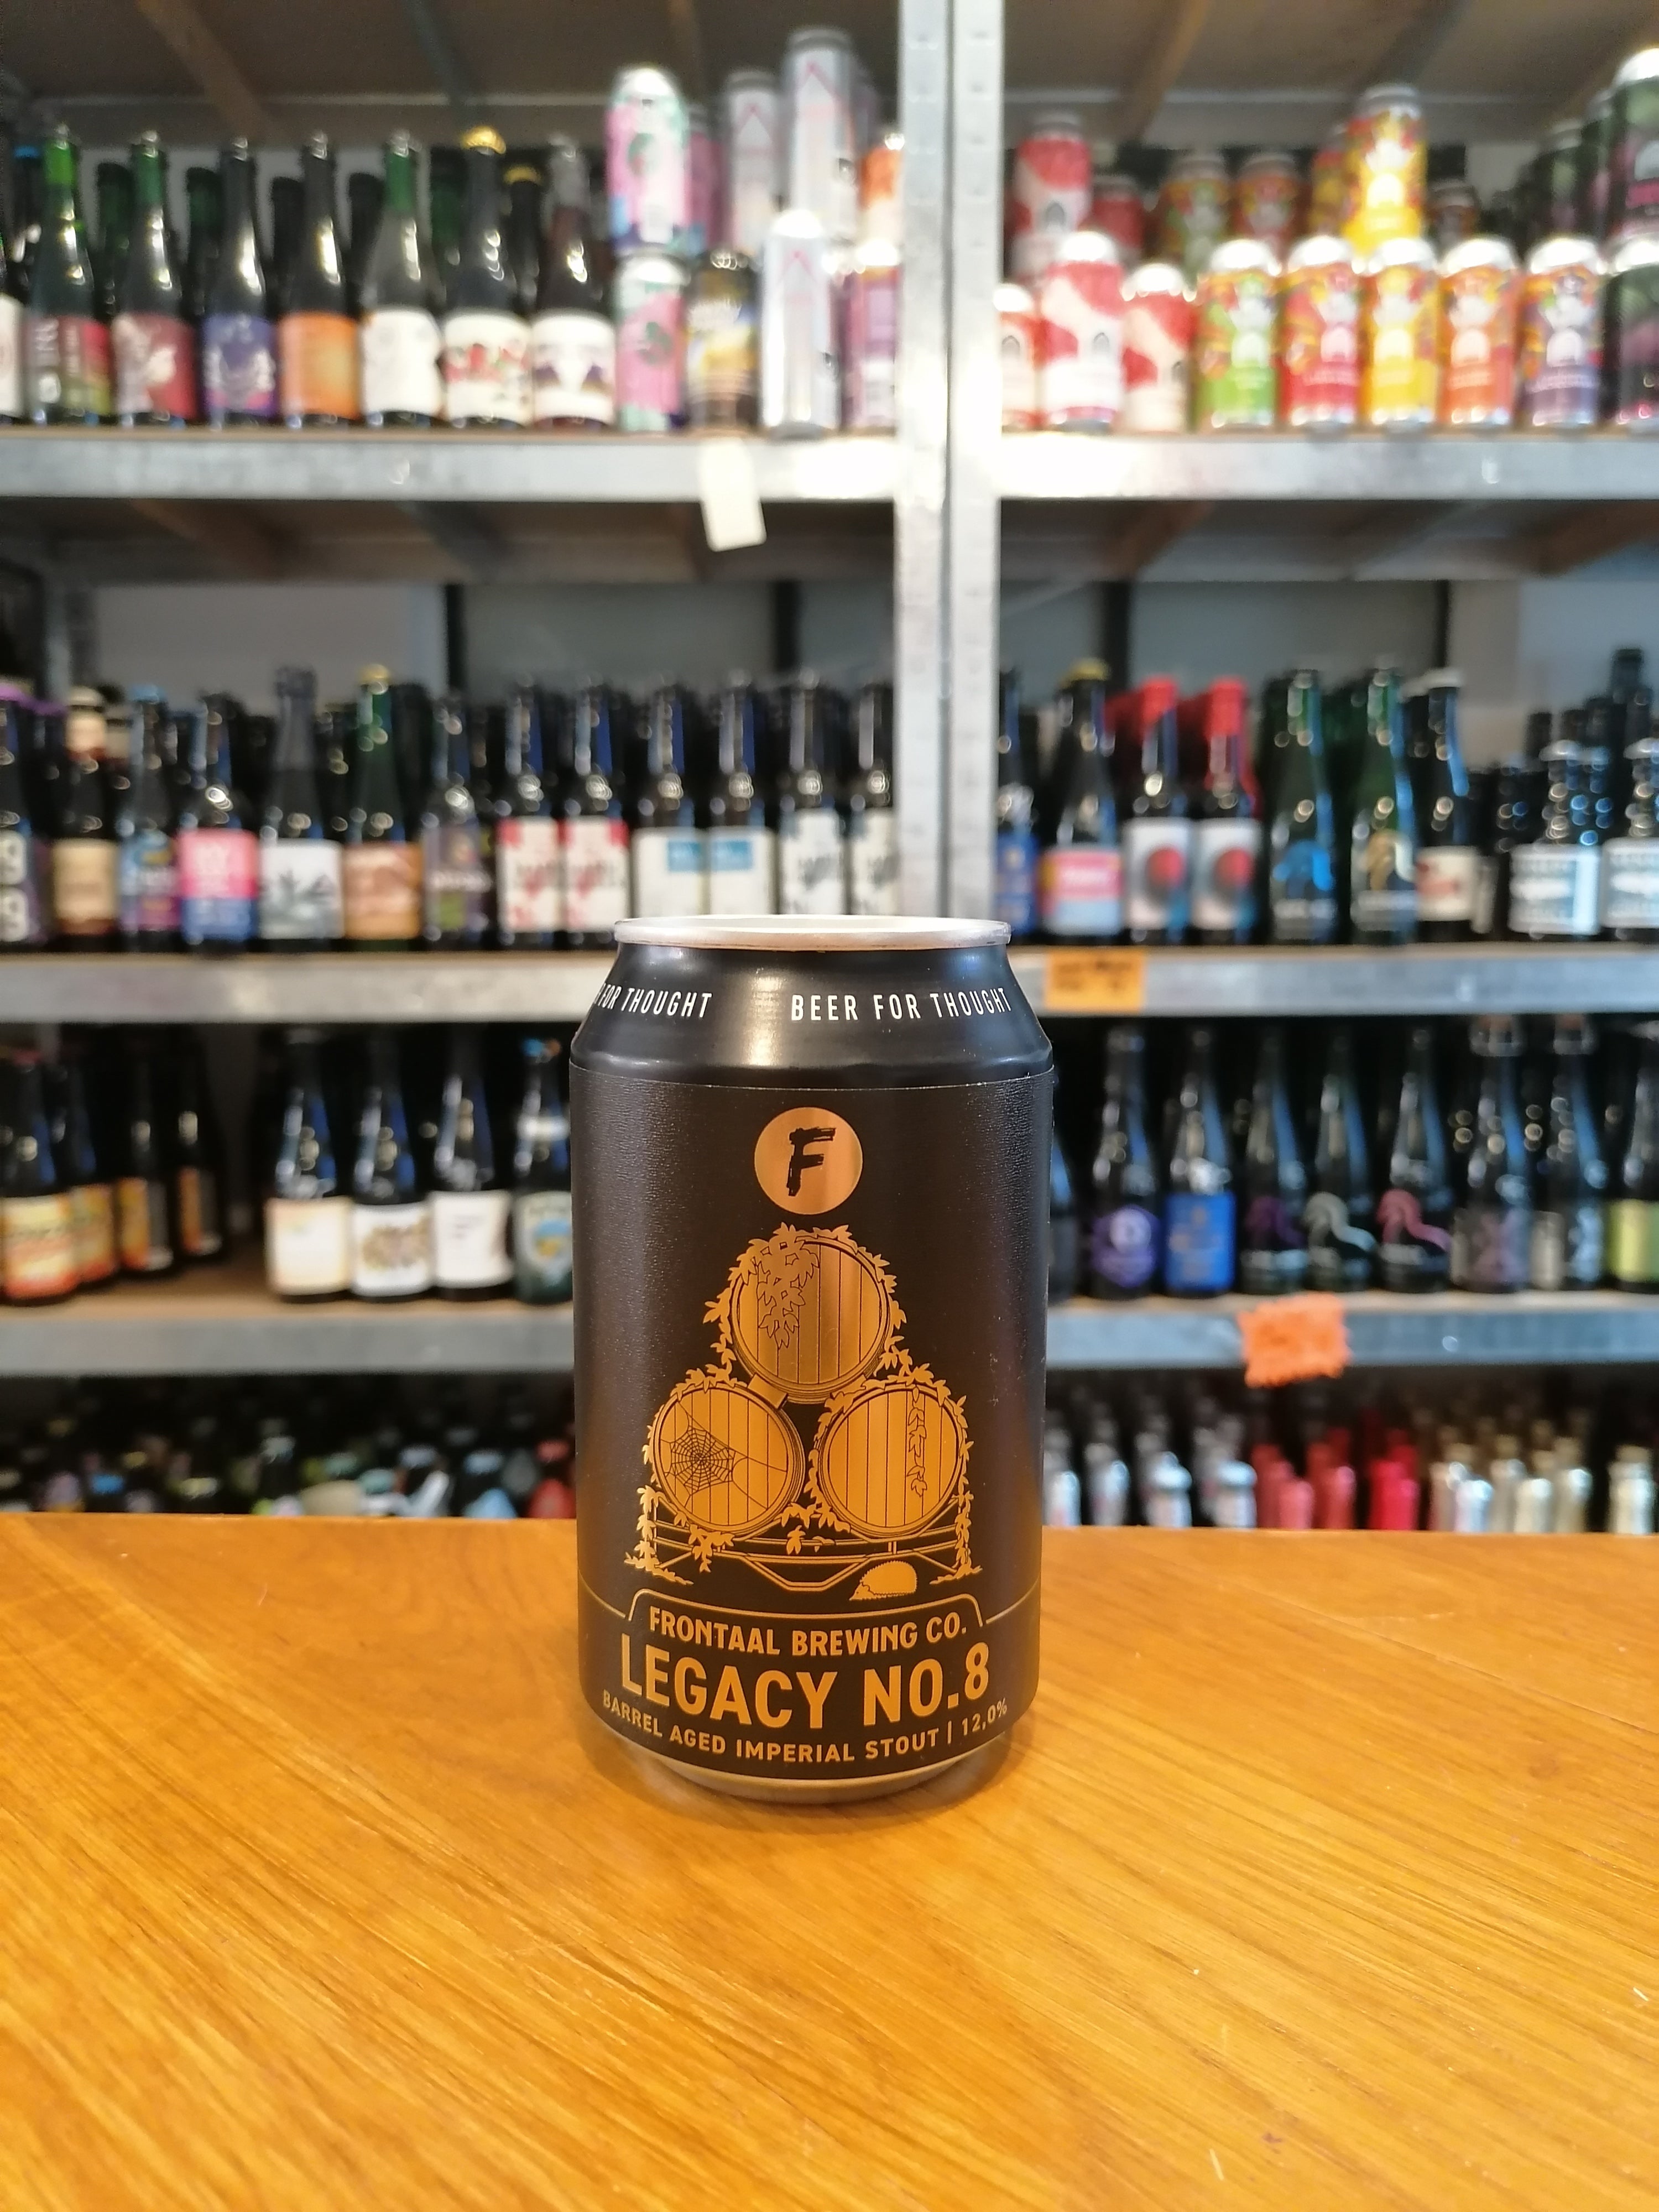 Se Frontaal Brewing Co. "Legacy No. 8" | 12,0% | 33cl | Imperial Double Stout hos Beershoppen.dk